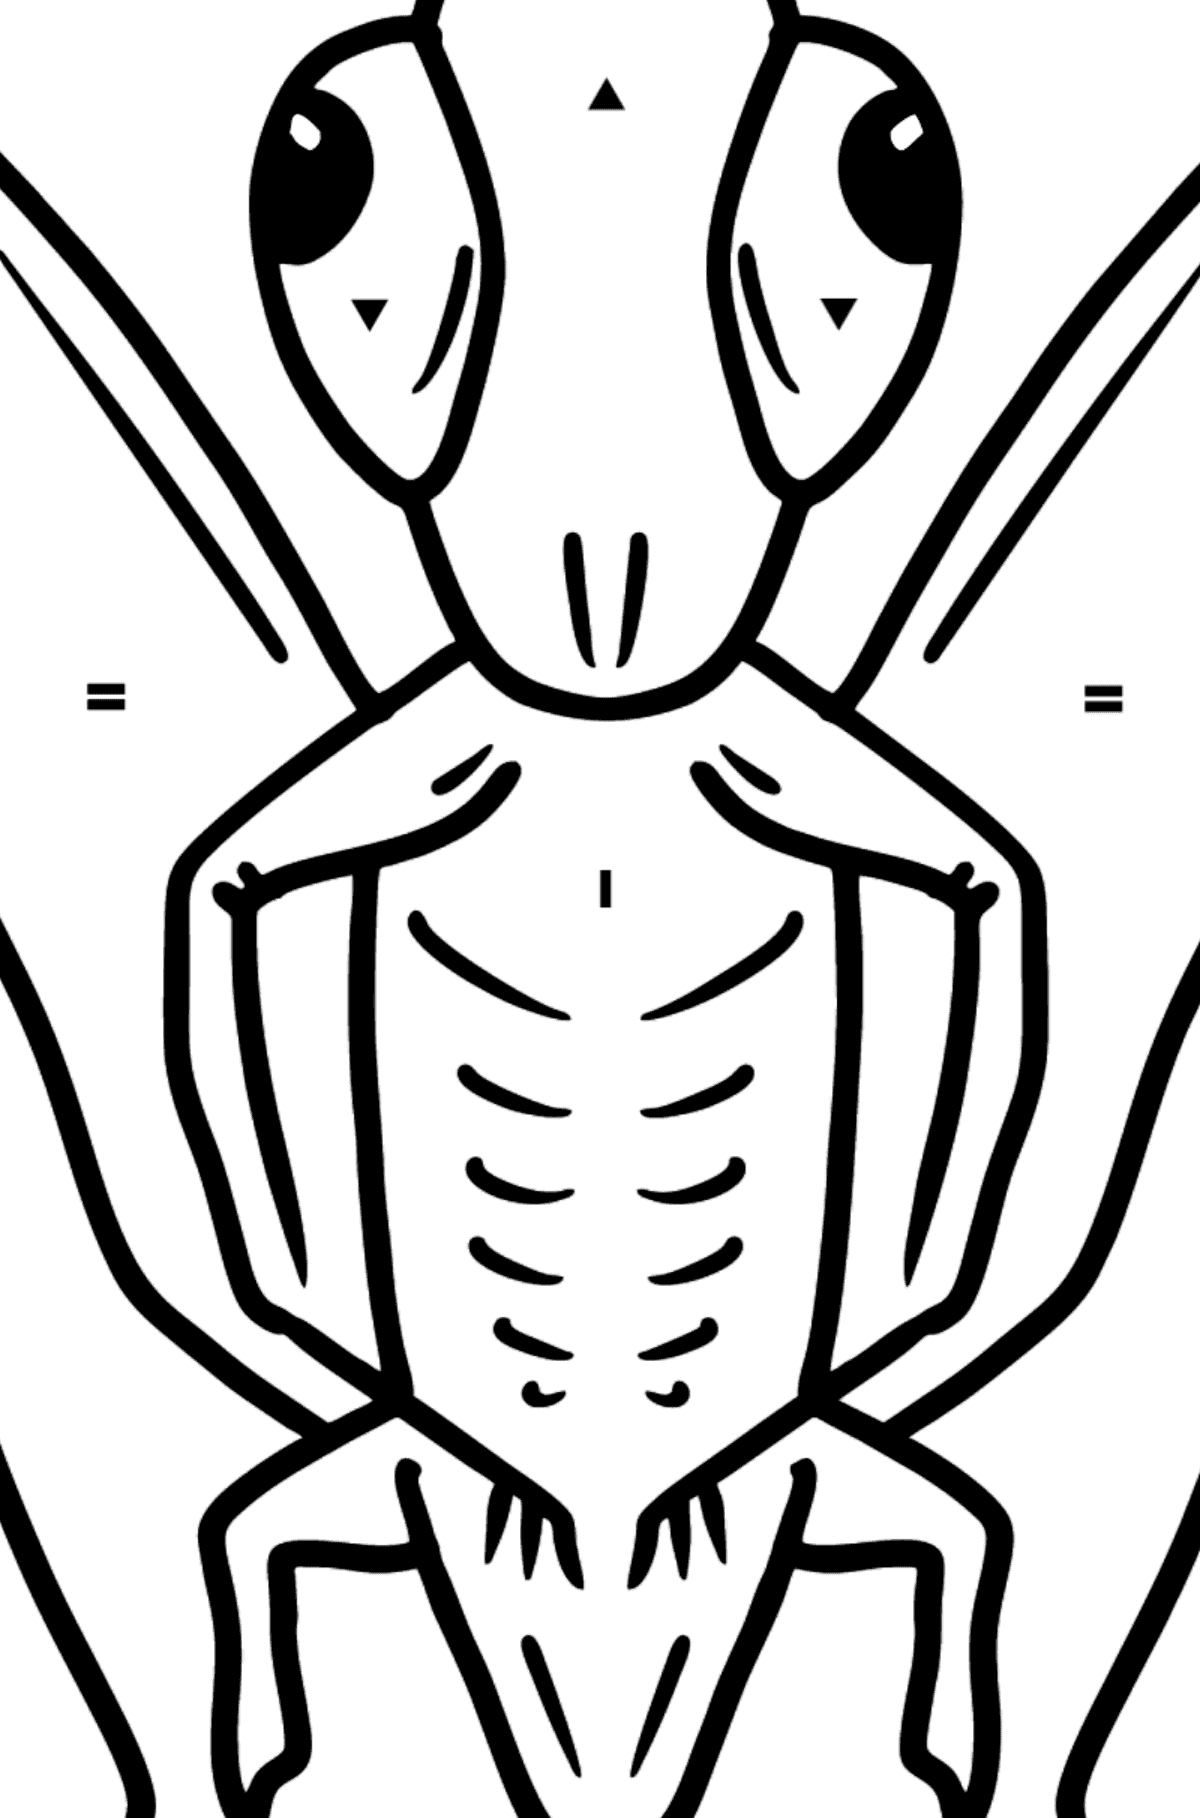 Grasshopper coloring page - Coloring by Symbols for Kids